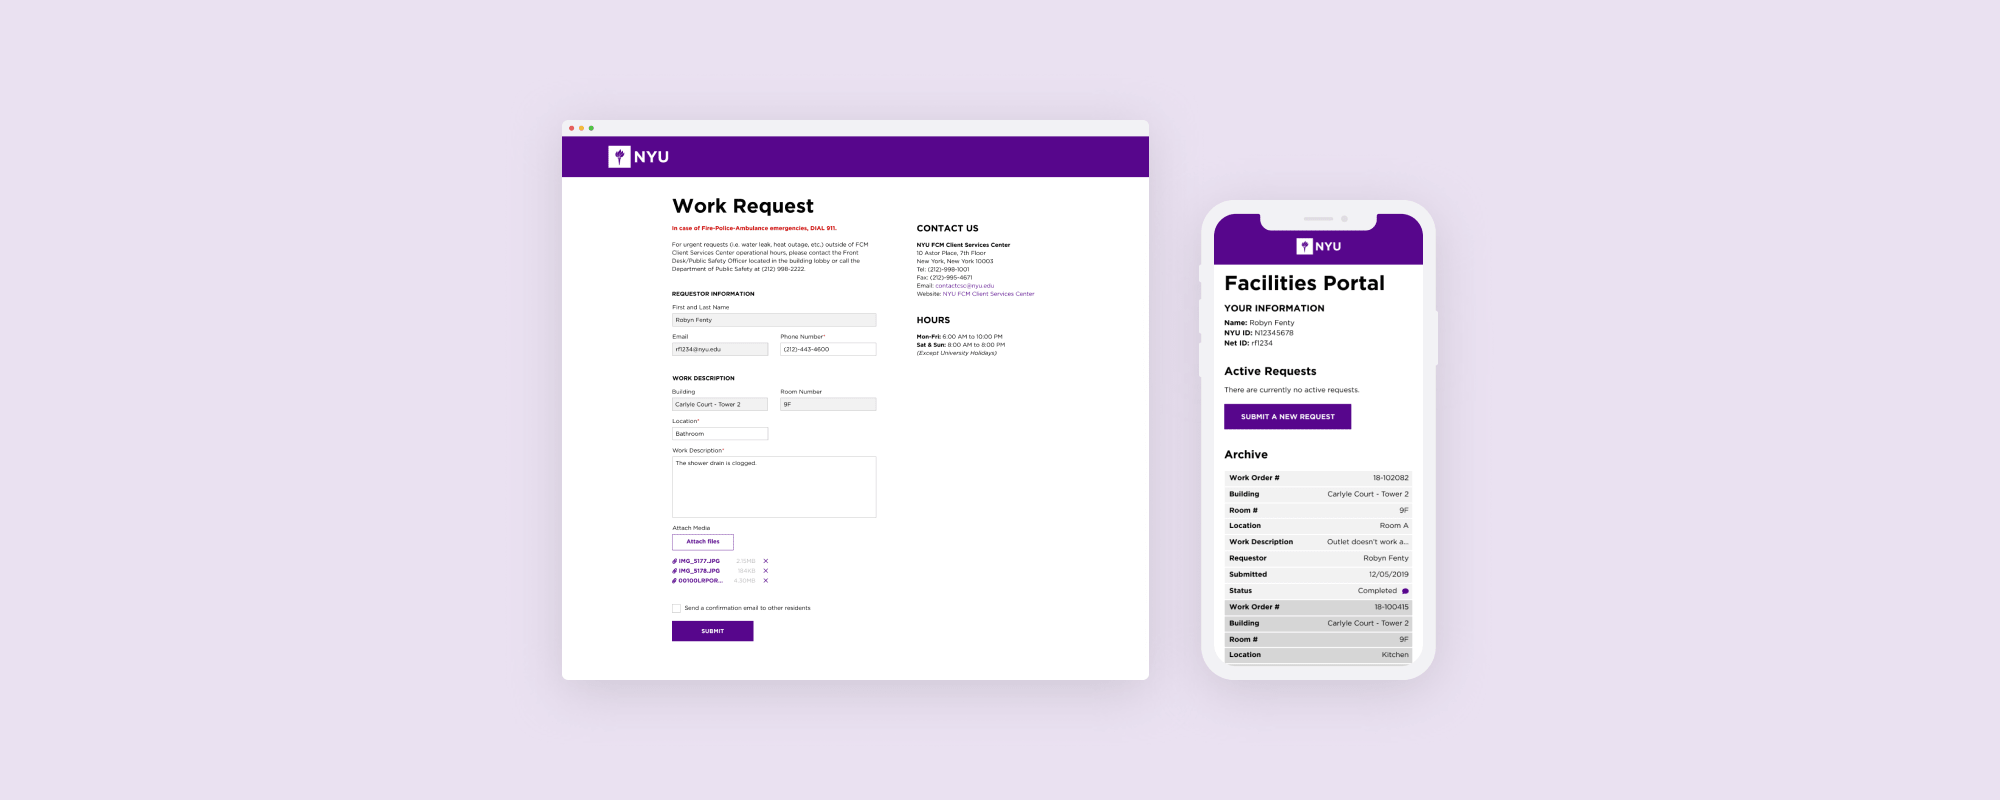 Web and mobile mockup of a form for NYU students to fill out if they have a maintenance issue in their dormitory